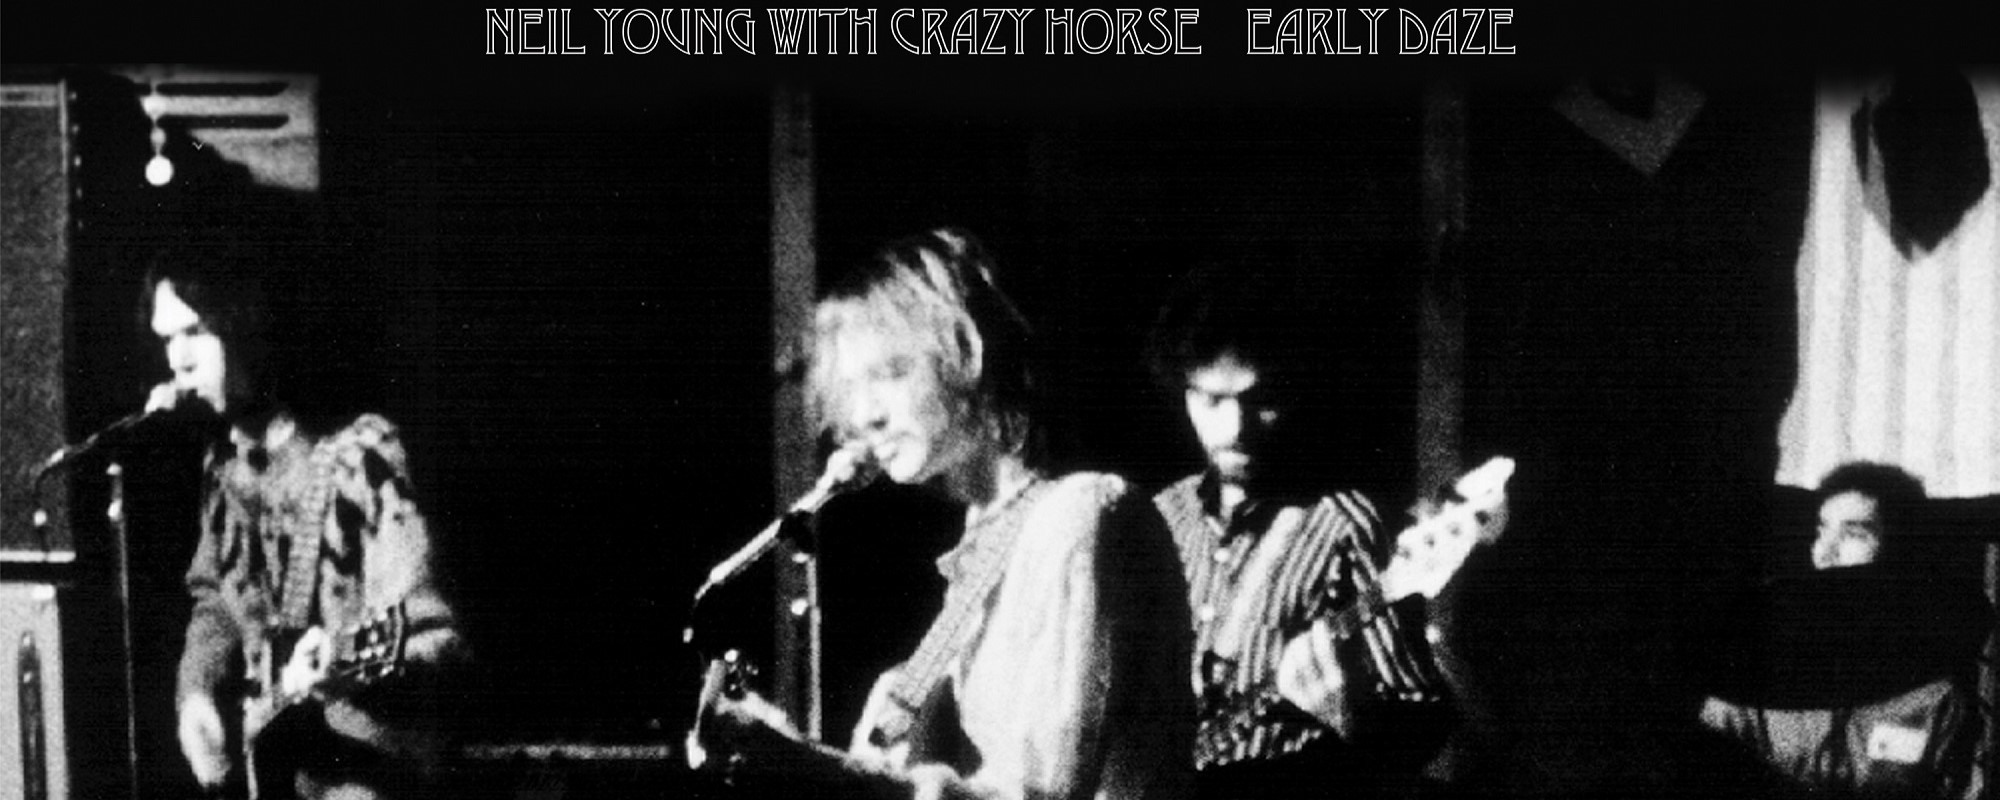 Upcoming Archival Neil Young & Crazy Horse Album Delves into the Band’s ‘Early Daze’